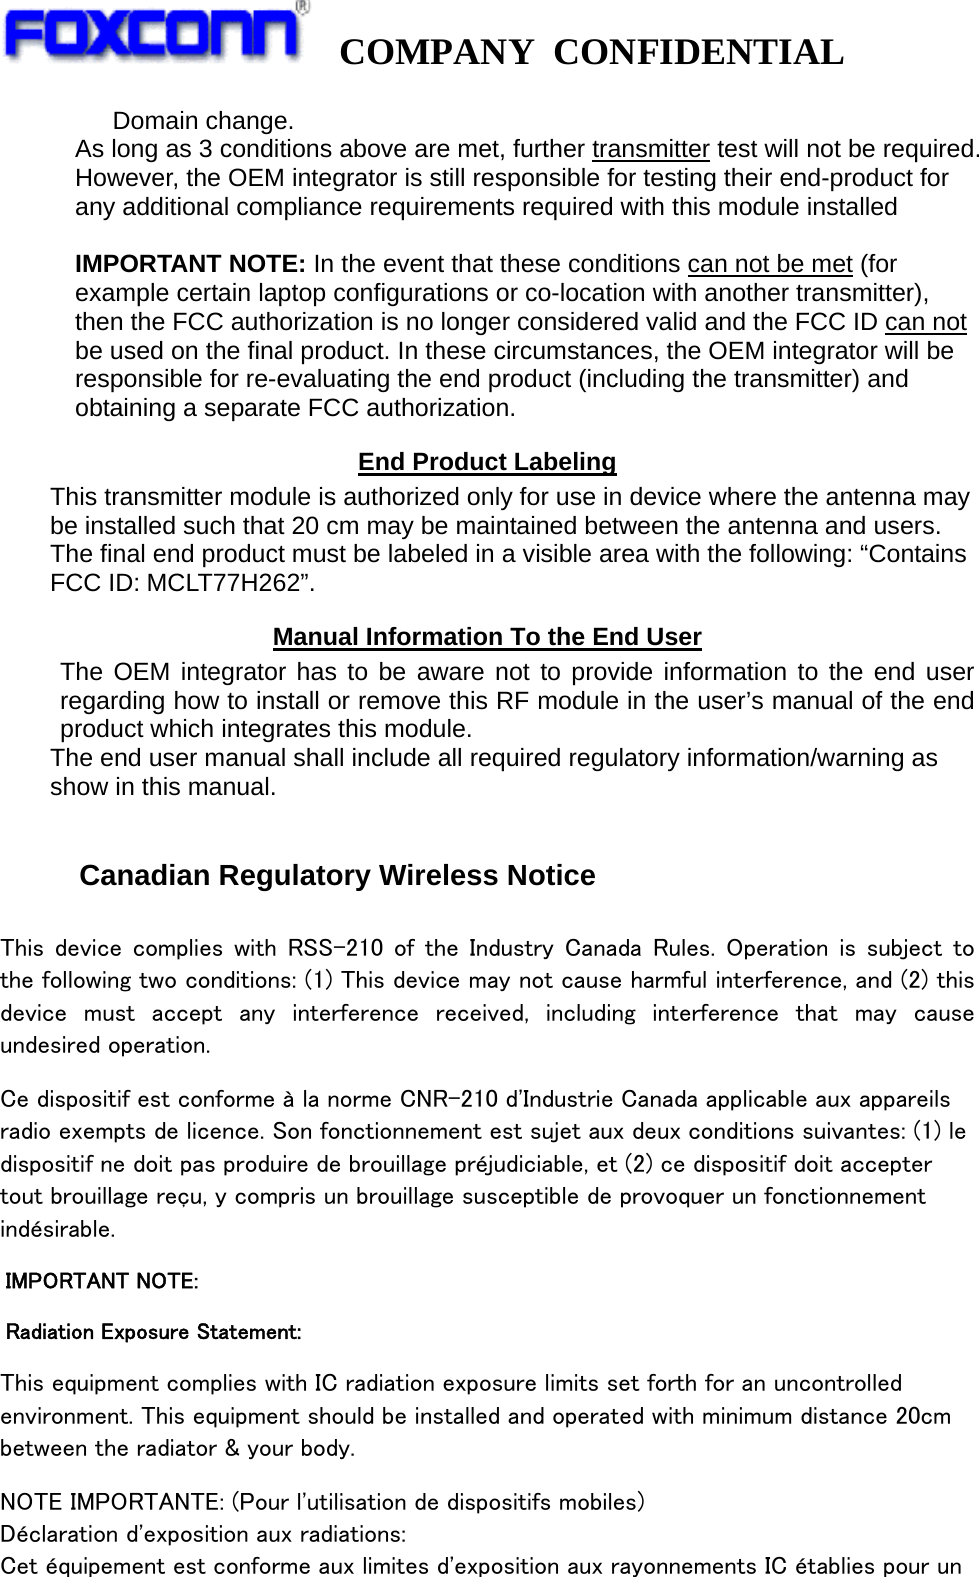   COMPANY CONFIDENTIAL             Domain change. As long as 3 conditions above are met, further transmitter test will not be required. However, the OEM integrator is still responsible for testing their end-product for any additional compliance requirements required with this module installed  IMPORTANT NOTE: In the event that these conditions can not be met (for example certain laptop configurations or co-location with another transmitter), then the FCC authorization is no longer considered valid and the FCC ID can not be used on the final product. In these circumstances, the OEM integrator will be responsible for re-evaluating the end product (including the transmitter) and obtaining a separate FCC authorization. End Product Labeling This transmitter module is authorized only for use in device where the antenna may be installed such that 20 cm may be maintained between the antenna and users. The final end product must be labeled in a visible area with the following: “Contains FCC ID: MCLT77H262”. Manual Information To the End User The OEM integrator has to be aware not to provide information to the end user regarding how to install or remove this RF module in the user’s manual of the end product which integrates this module. The end user manual shall include all required regulatory information/warning as show in this manual.   Canadian Regulatory Wireless Notice  This  device  complies  with  RSS-210  of  the  Industry  Canada  Rules.  Operation  is  subject  to the following two conditions: (1) This device may not cause harmful interference, and (2) this device  must  accept  any  interference  received,  including  interference  that  may  cause undesired operation. Ce dispositif est conforme à la norme CNR-210 d&apos;Industrie Canada applicable aux appareils radio exempts de licence. Son fonctionnement est sujet aux deux conditions suivantes: (1) le dispositif ne doit pas produire de brouillage préjudiciable, et (2) ce dispositif doit accepter tout brouillage reçu, y compris un brouillage susceptible de provoquer un fonctionnement indésirable.   IMPORTANT NOTE:   Radiation Exposure Statement: This equipment complies with IC radiation exposure limits set forth for an uncontrolled environment. This equipment should be installed and operated with minimum distance 20cm between the radiator &amp; your body. NOTE IMPORTANTE: (Pour l&apos;utilisation de dispositifs mobiles) Déclaration d&apos;exposition aux radiations: Cet équipement est conforme aux limites d&apos;exposition aux rayonnements IC établies pour un 